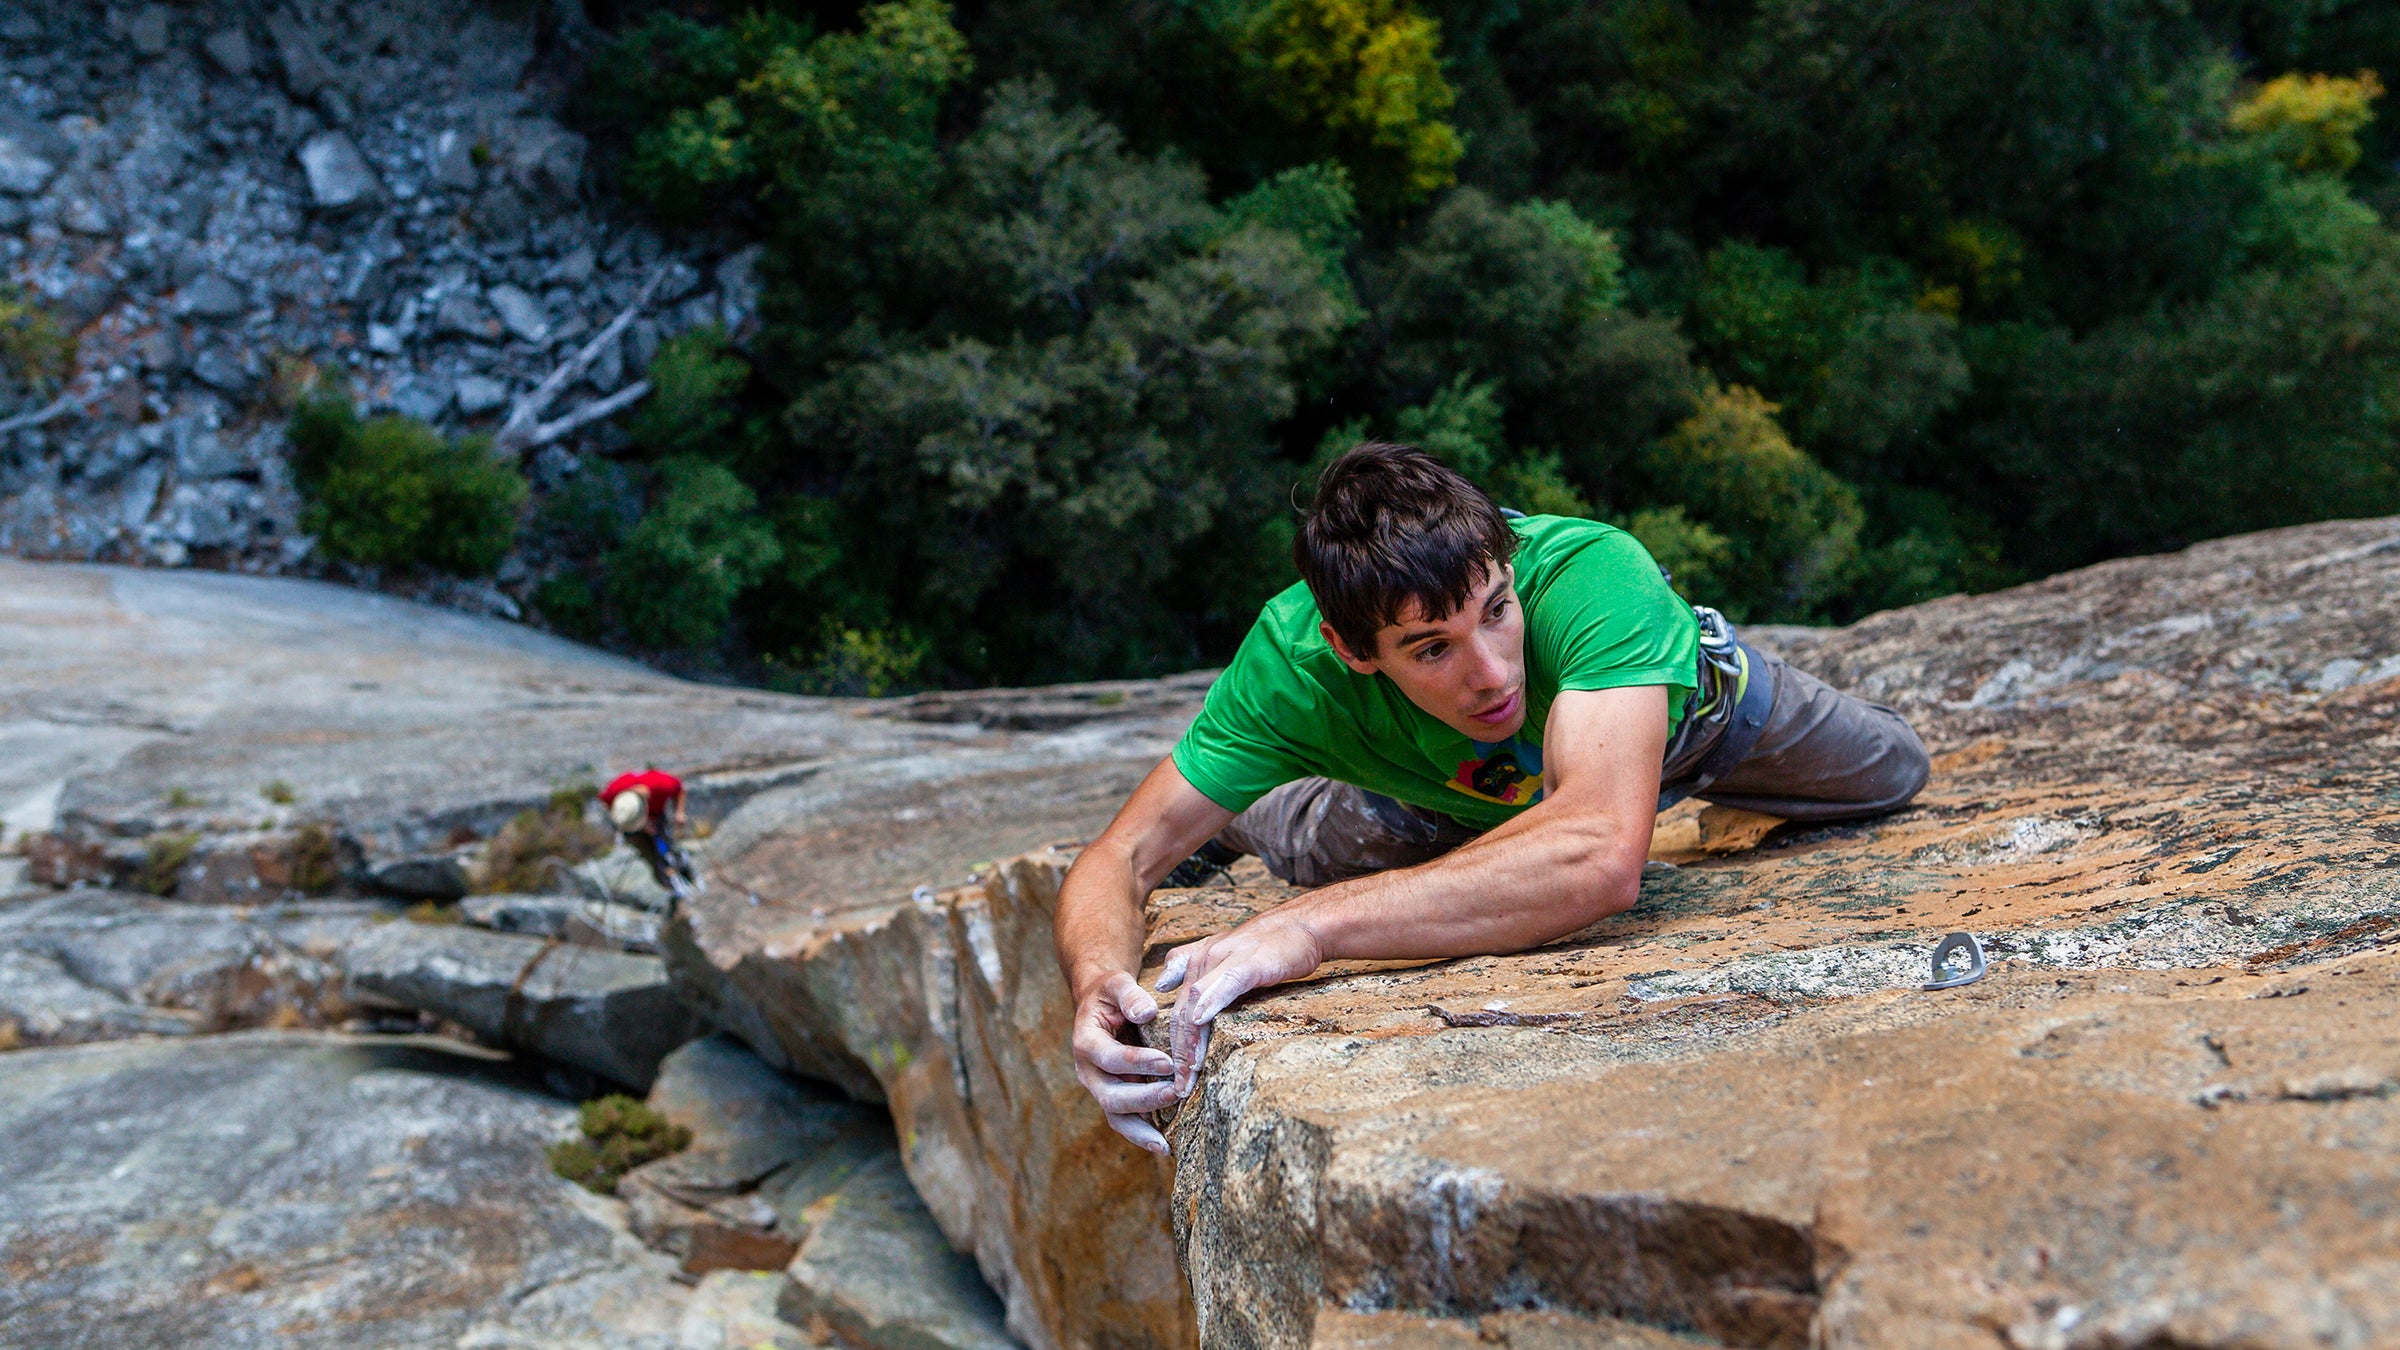 Alex Honnold Talks to Tim Ferriss About Fear and Risk